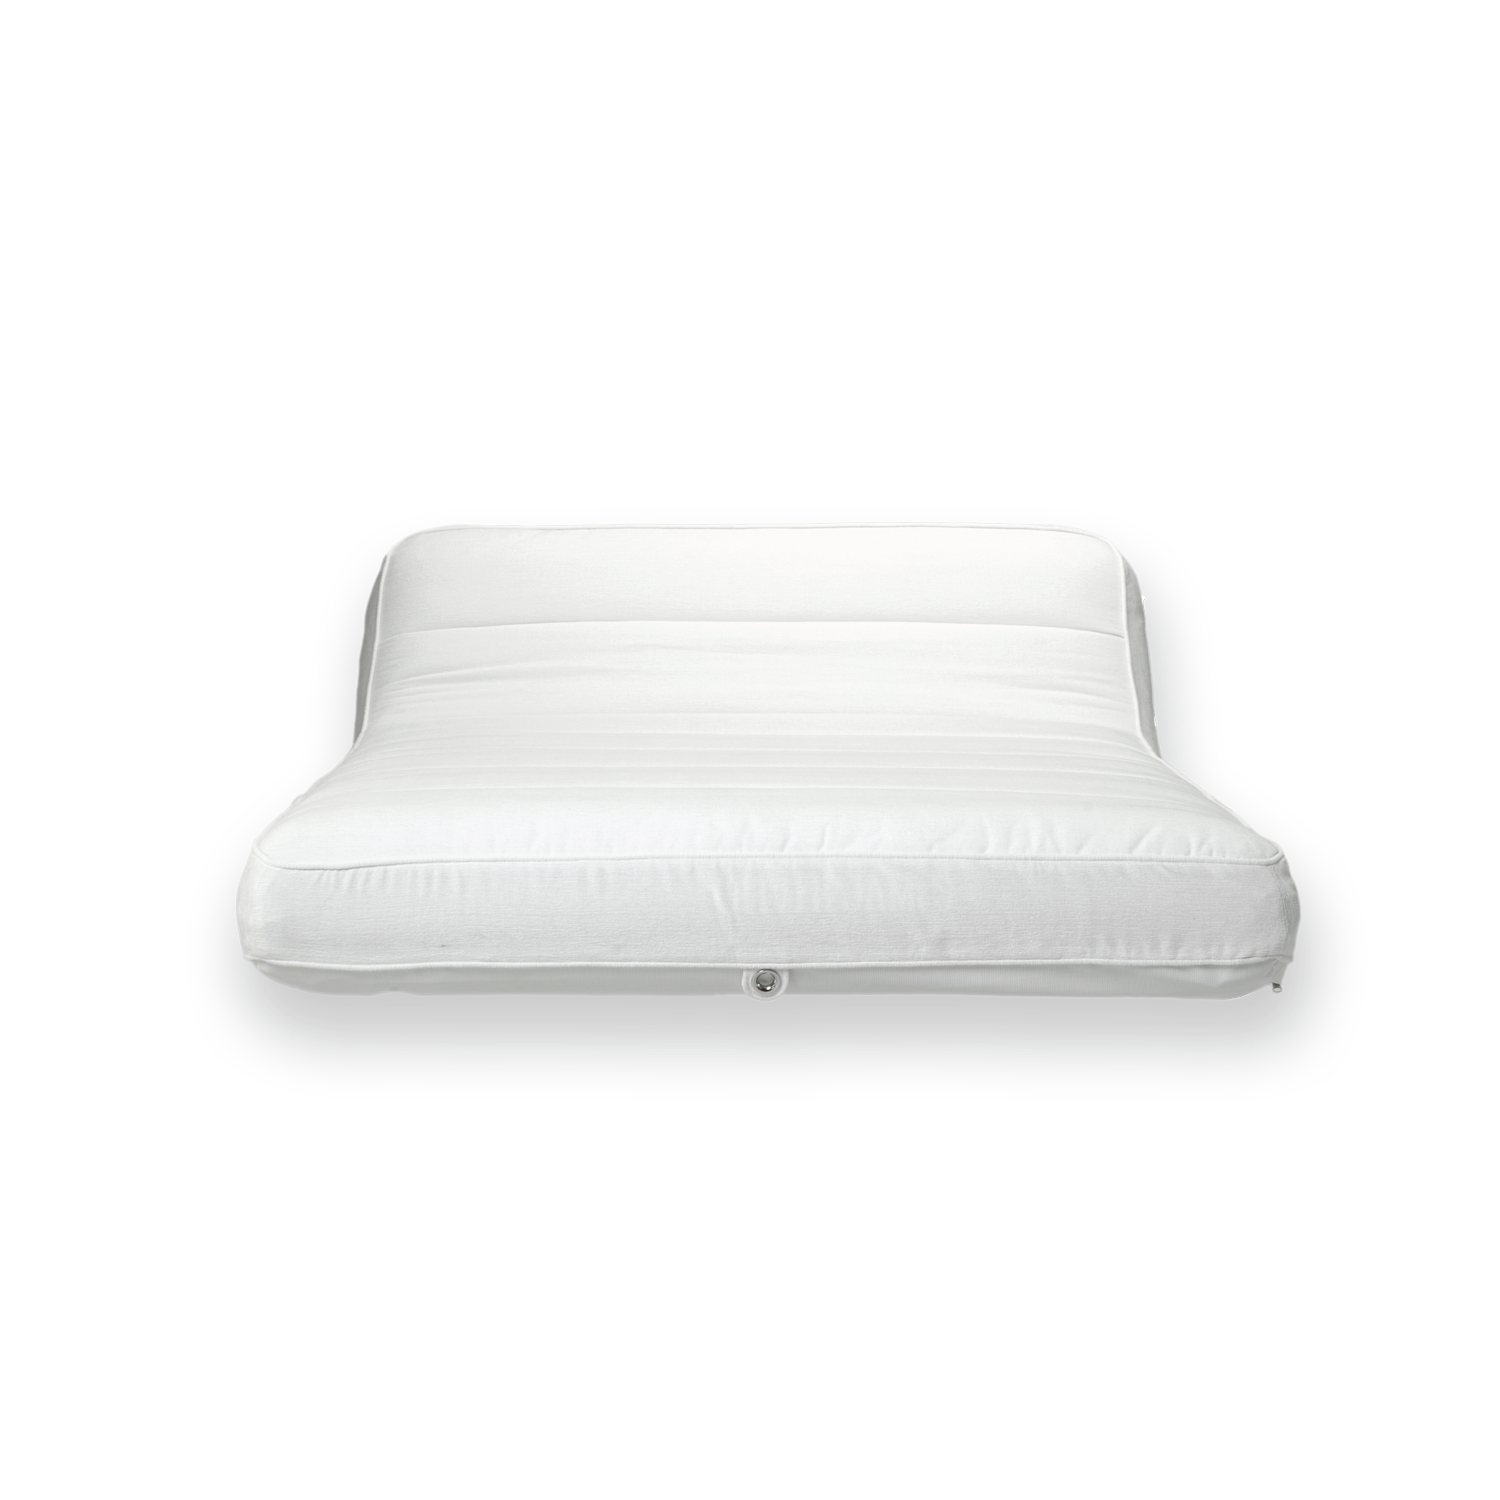 The front profile of a double white terry toweled luxury pool float.